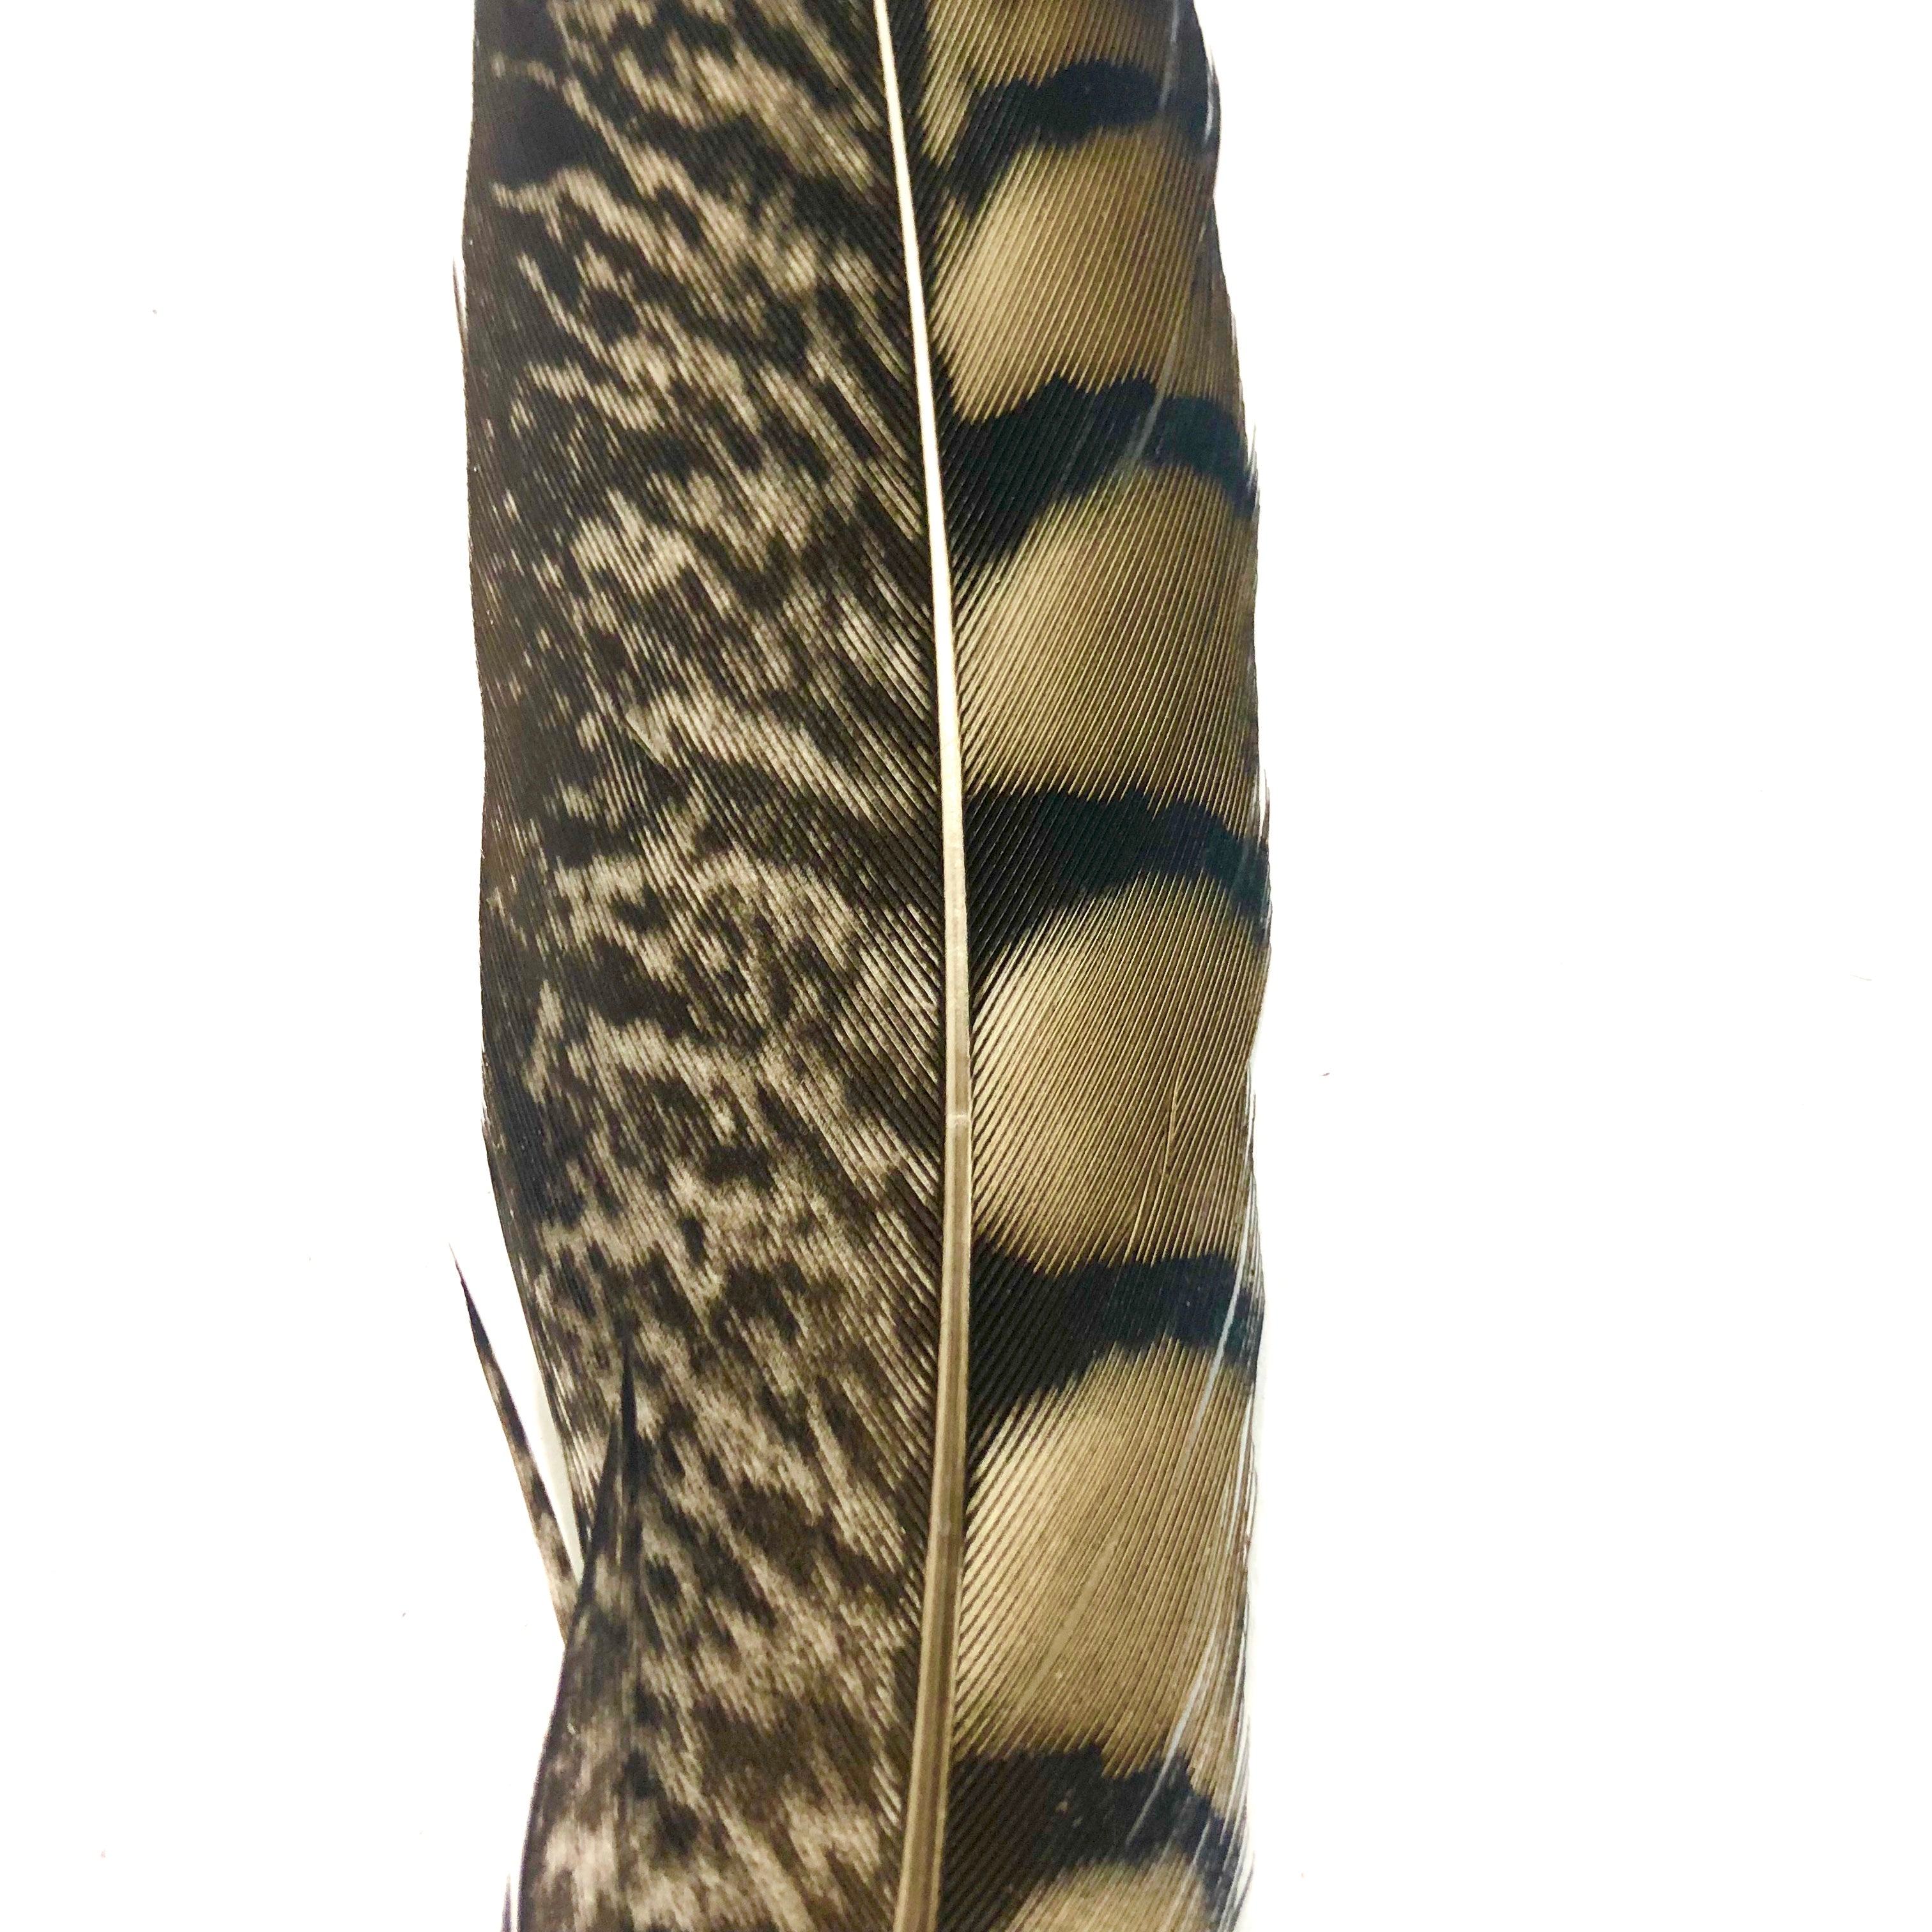 5" to 10" Lady Amherst Pheasant Side Tail Feather x 10 pcs - Natural